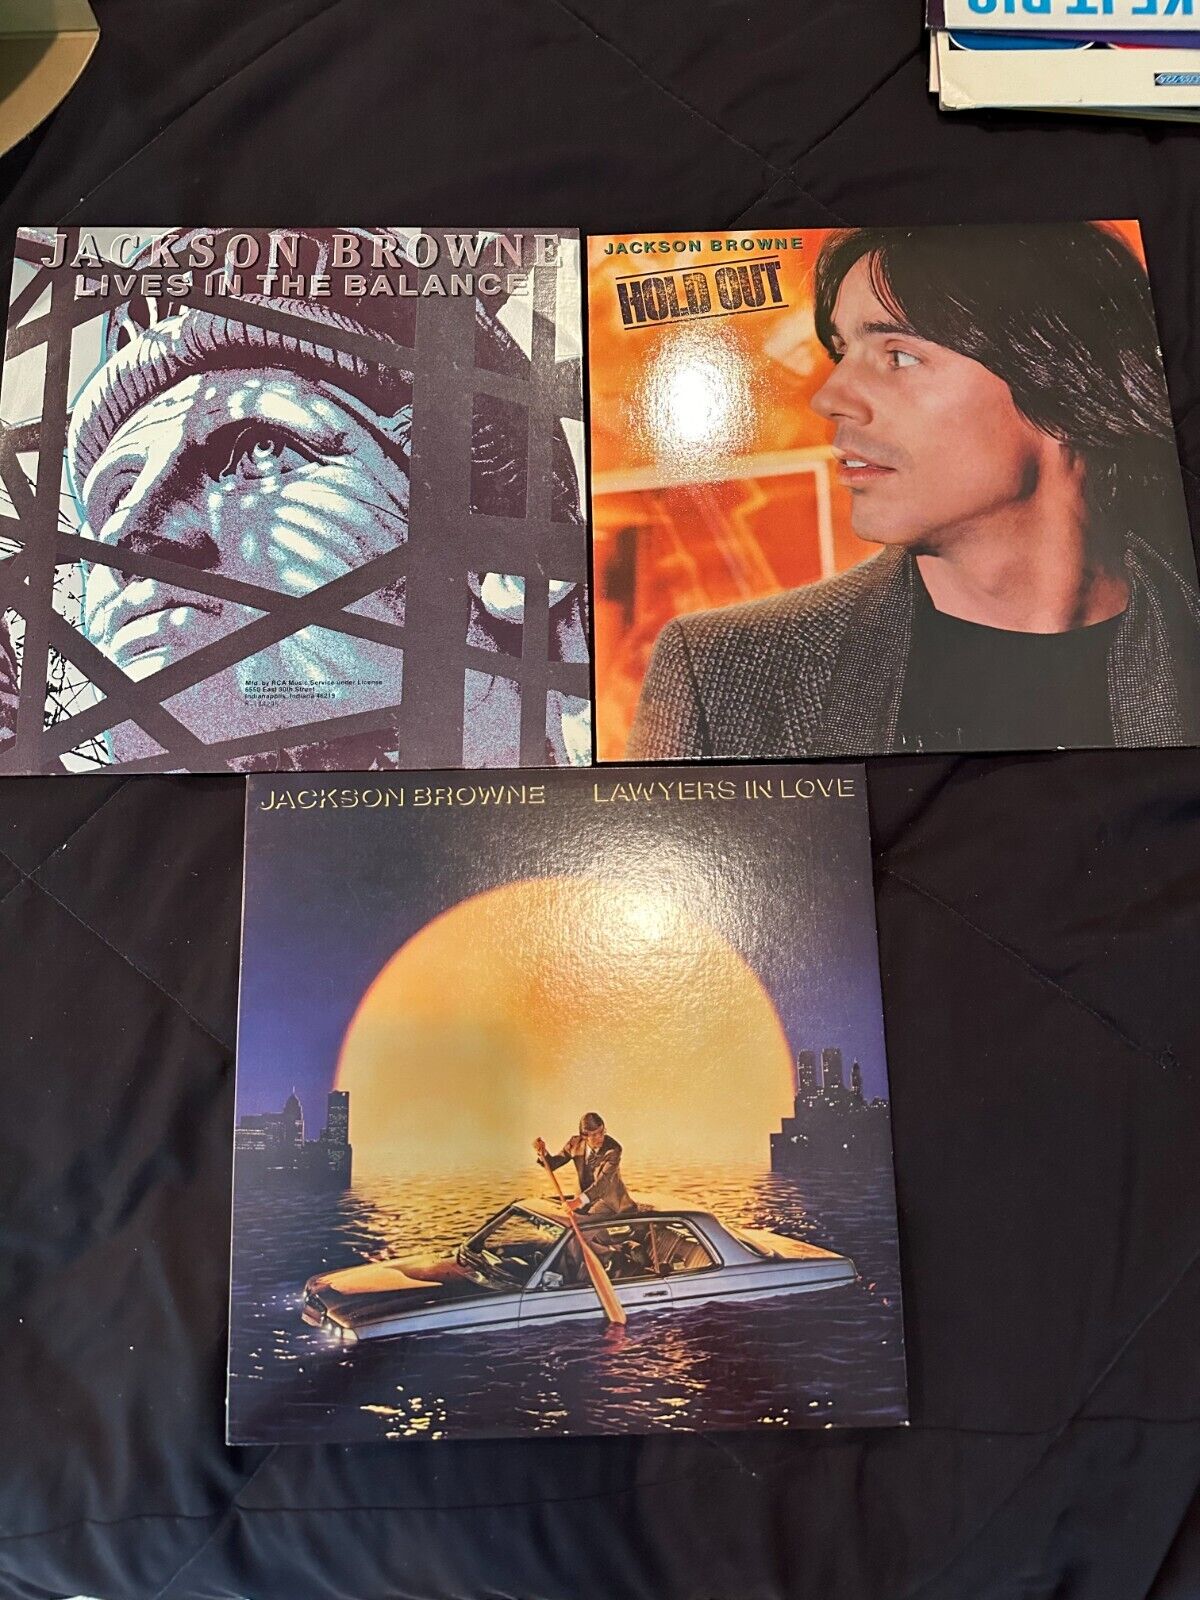 JACKSON BROWNE Collection of 3 LPs